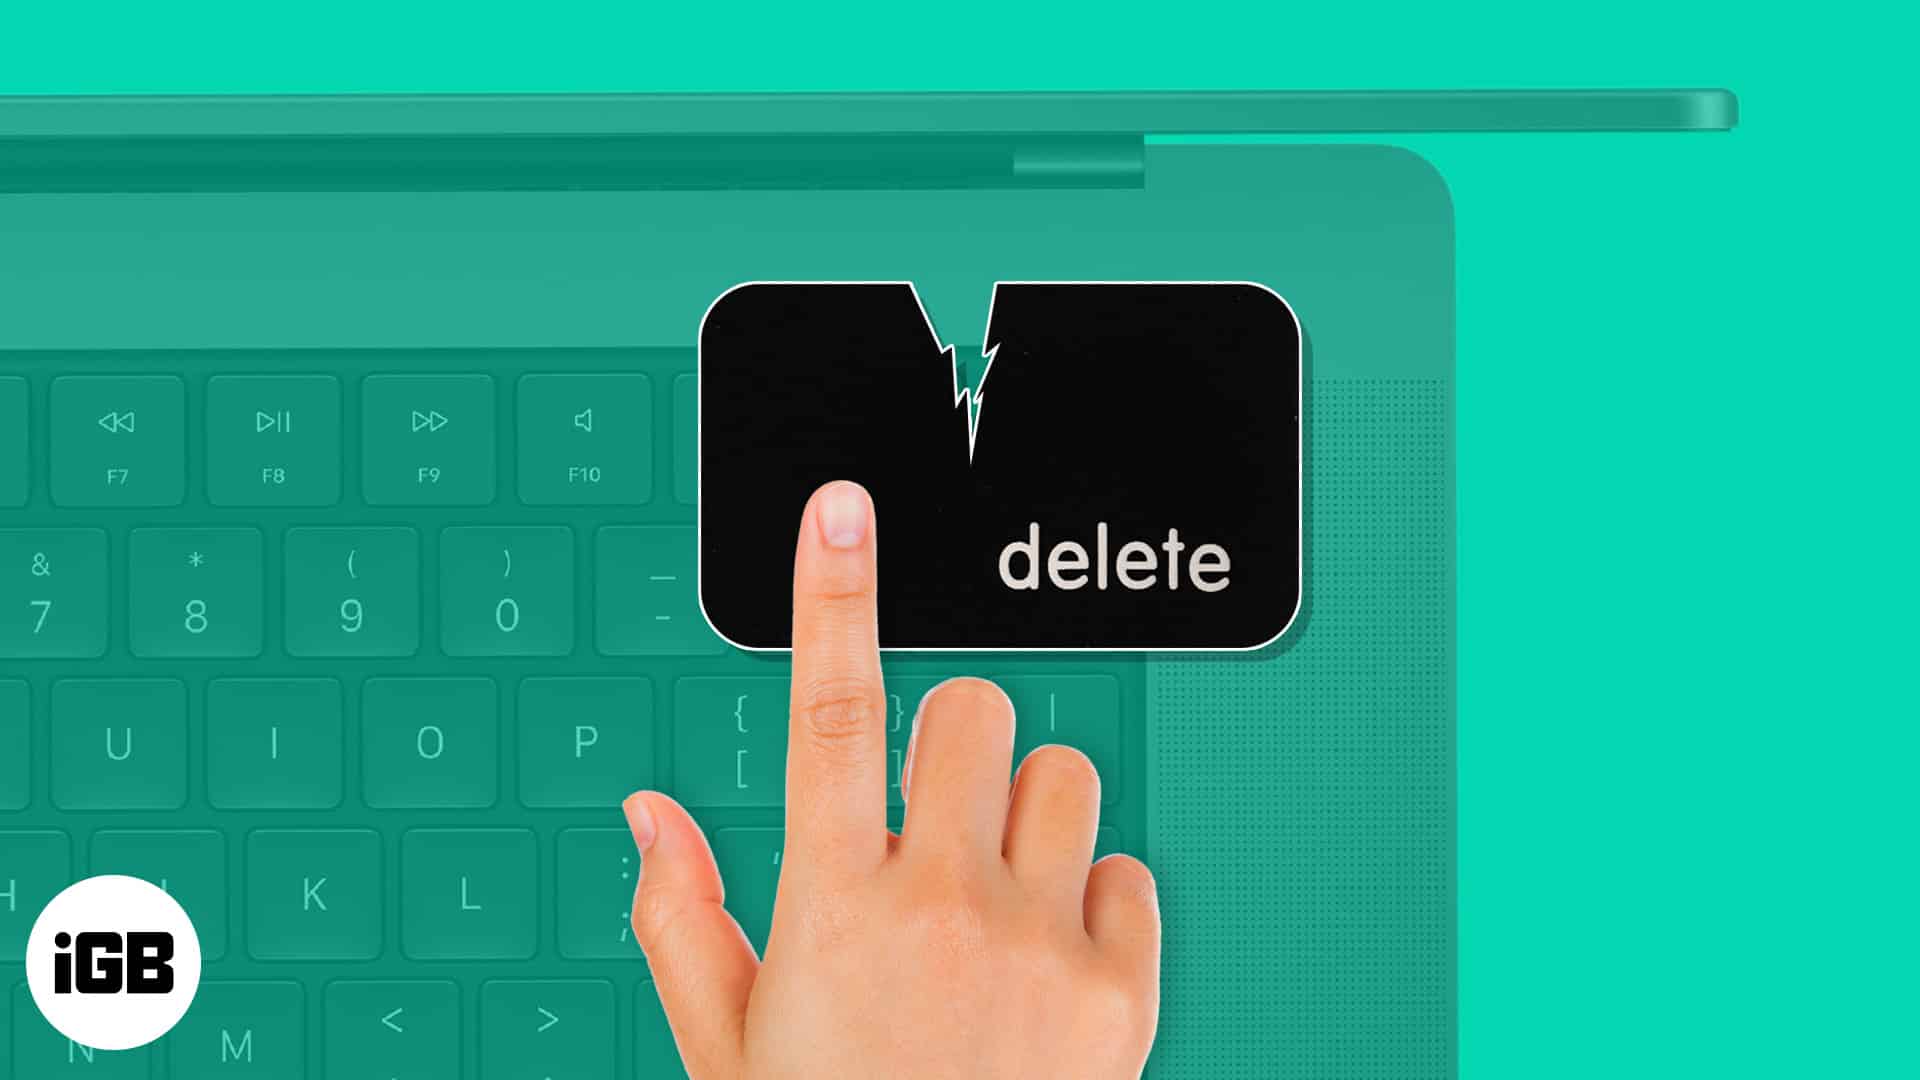 How to fix delete key not working on Mac